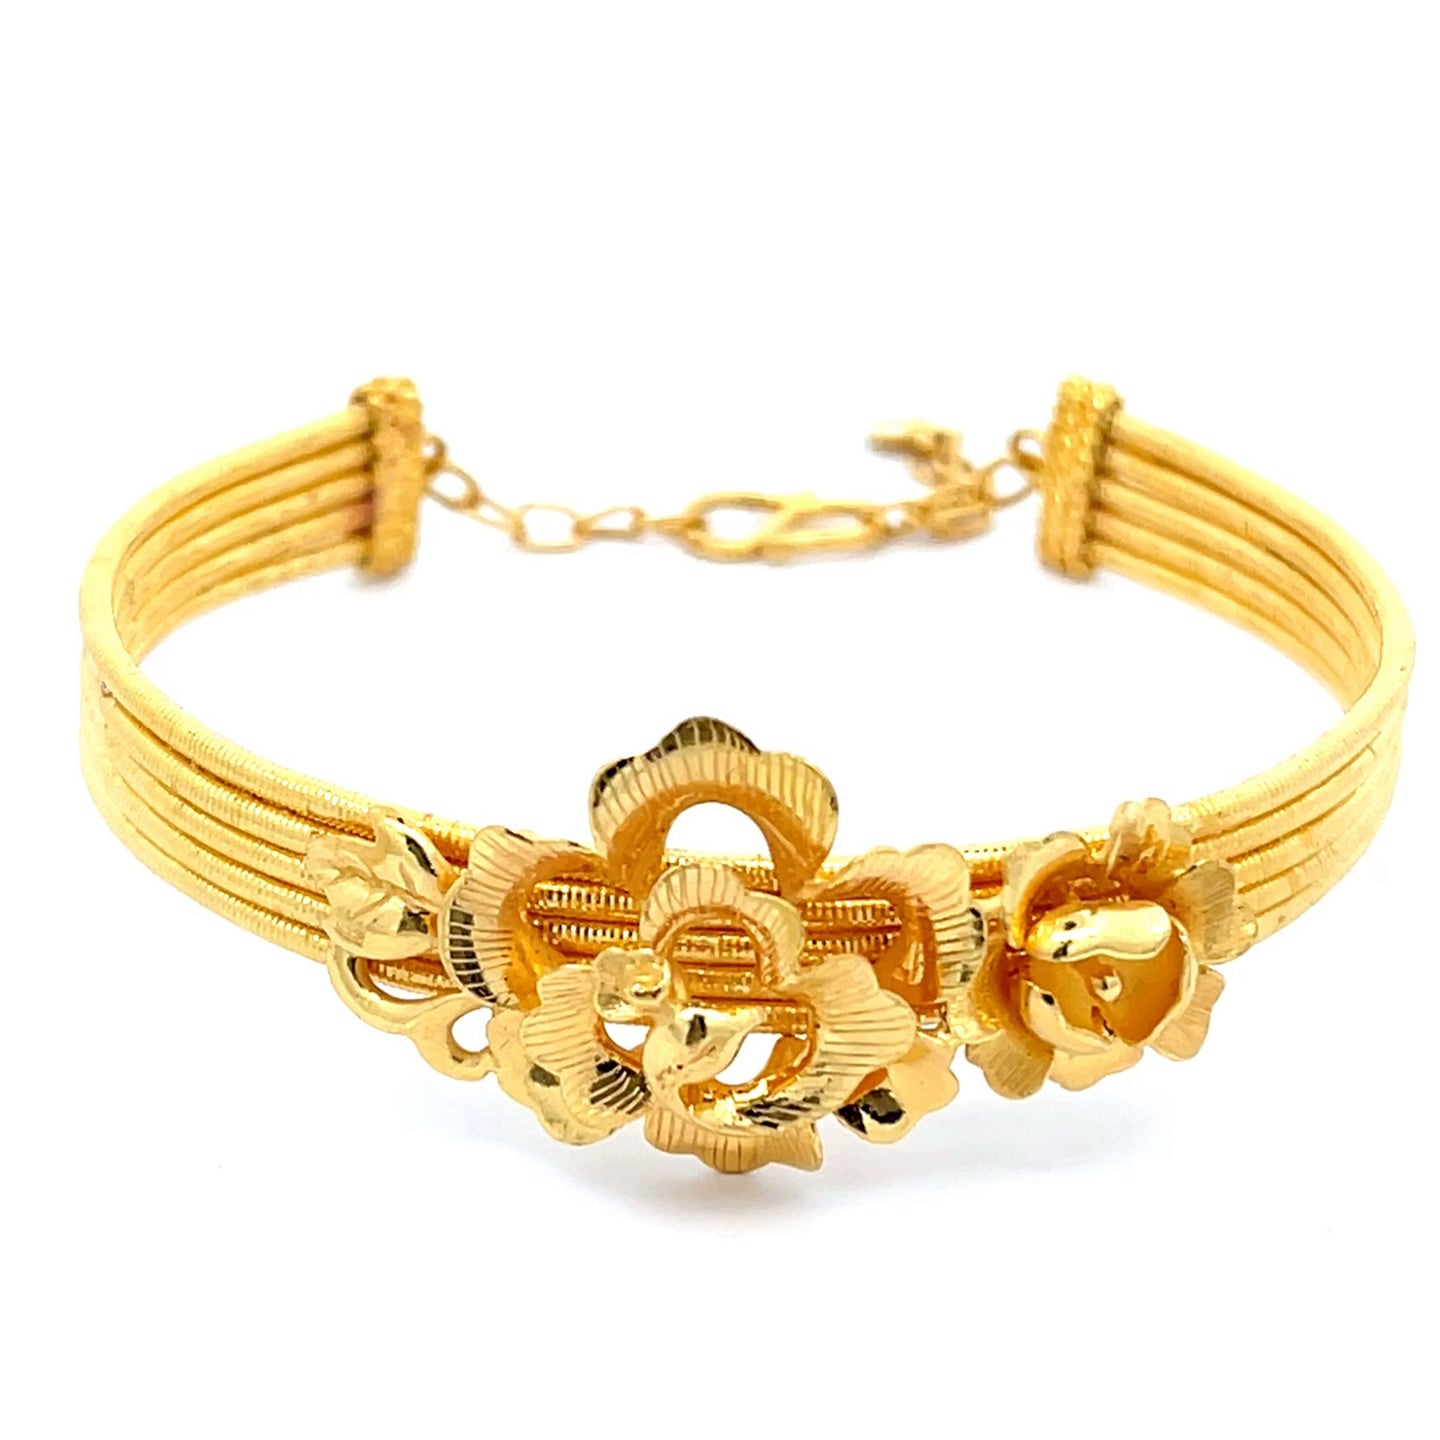 24K Solid Yellow Gold Flower Bangle 23.3 Grams